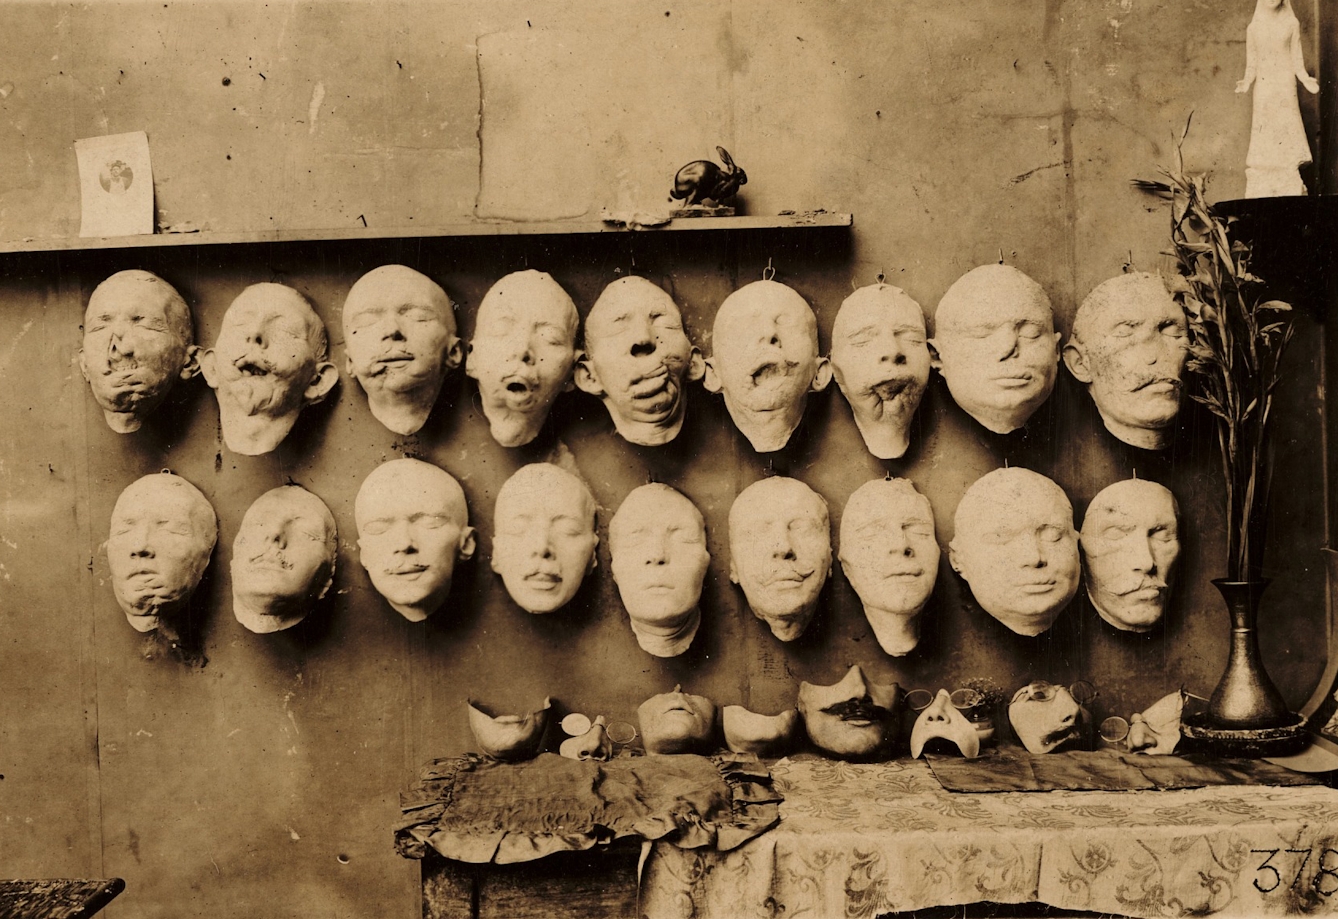 A wall on which are mounted 18 plaster casts of injured faces.